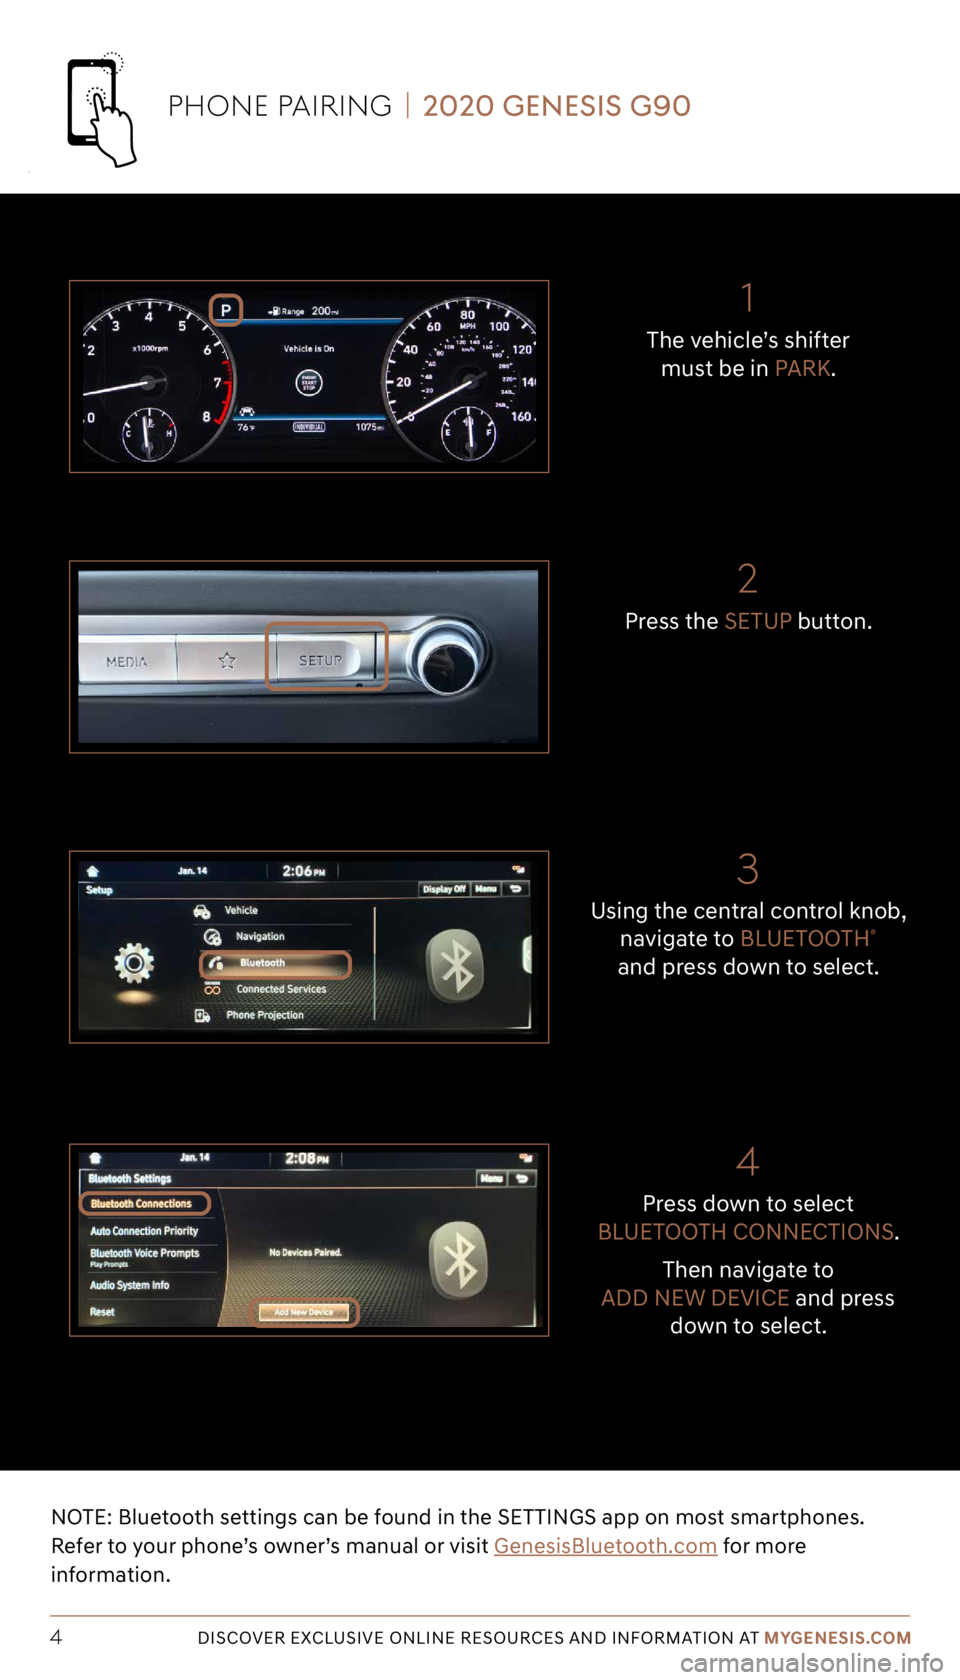 GENESIS G90 2020  Getting Started Guide NOTE: Bluetooth settings can be found in the SETTINGS app on most smartphones.  
Refer to your phone’s owner’s manual or visit GenesisBluetooth.com for more 
information.
DISCOVER EXCLUSIVE ONLINE